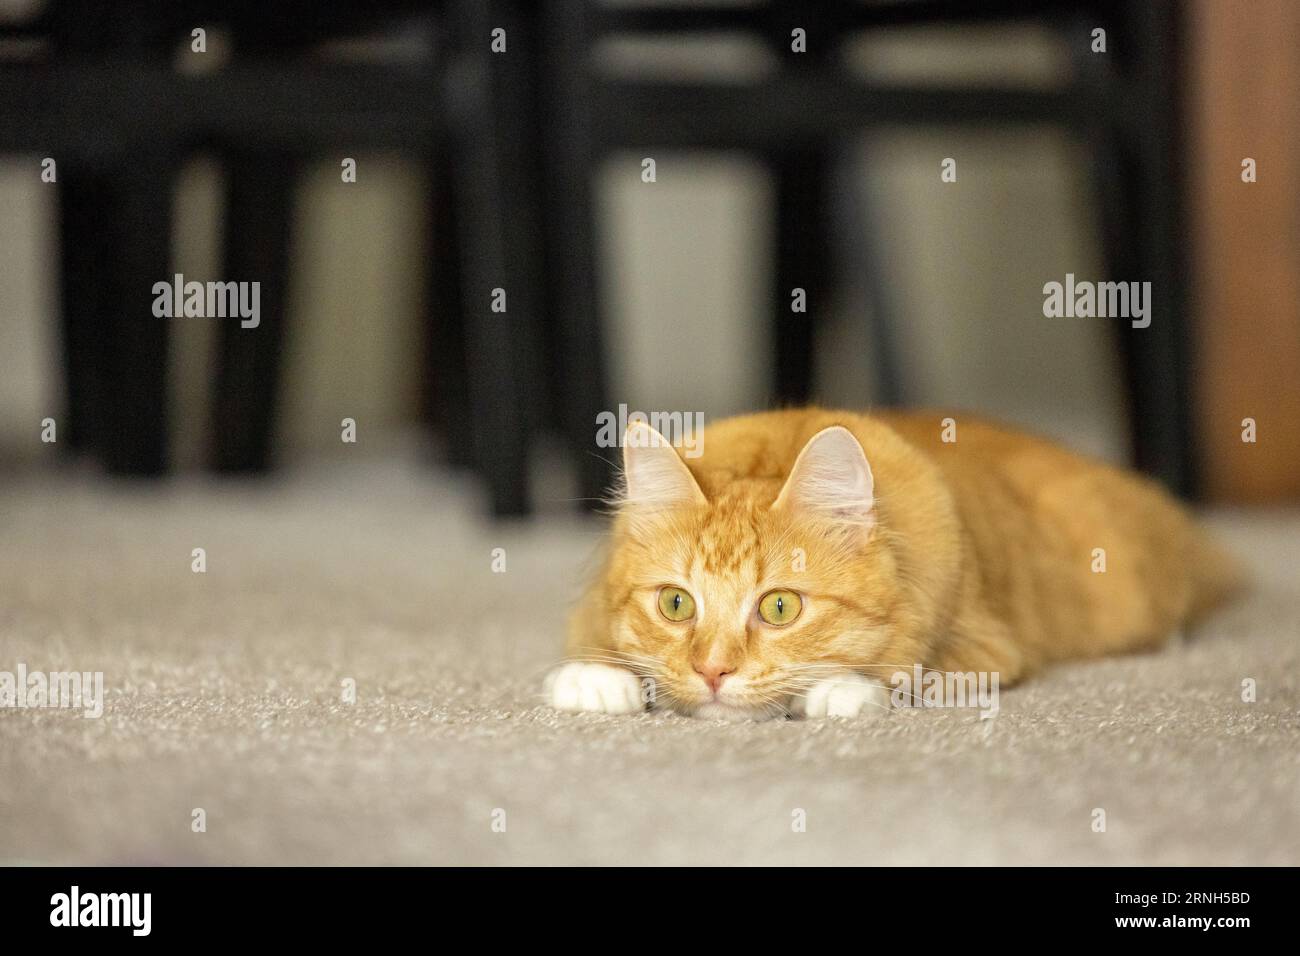 A long-haired orange tabby cat lying on the carpet in a home. Stock Photo